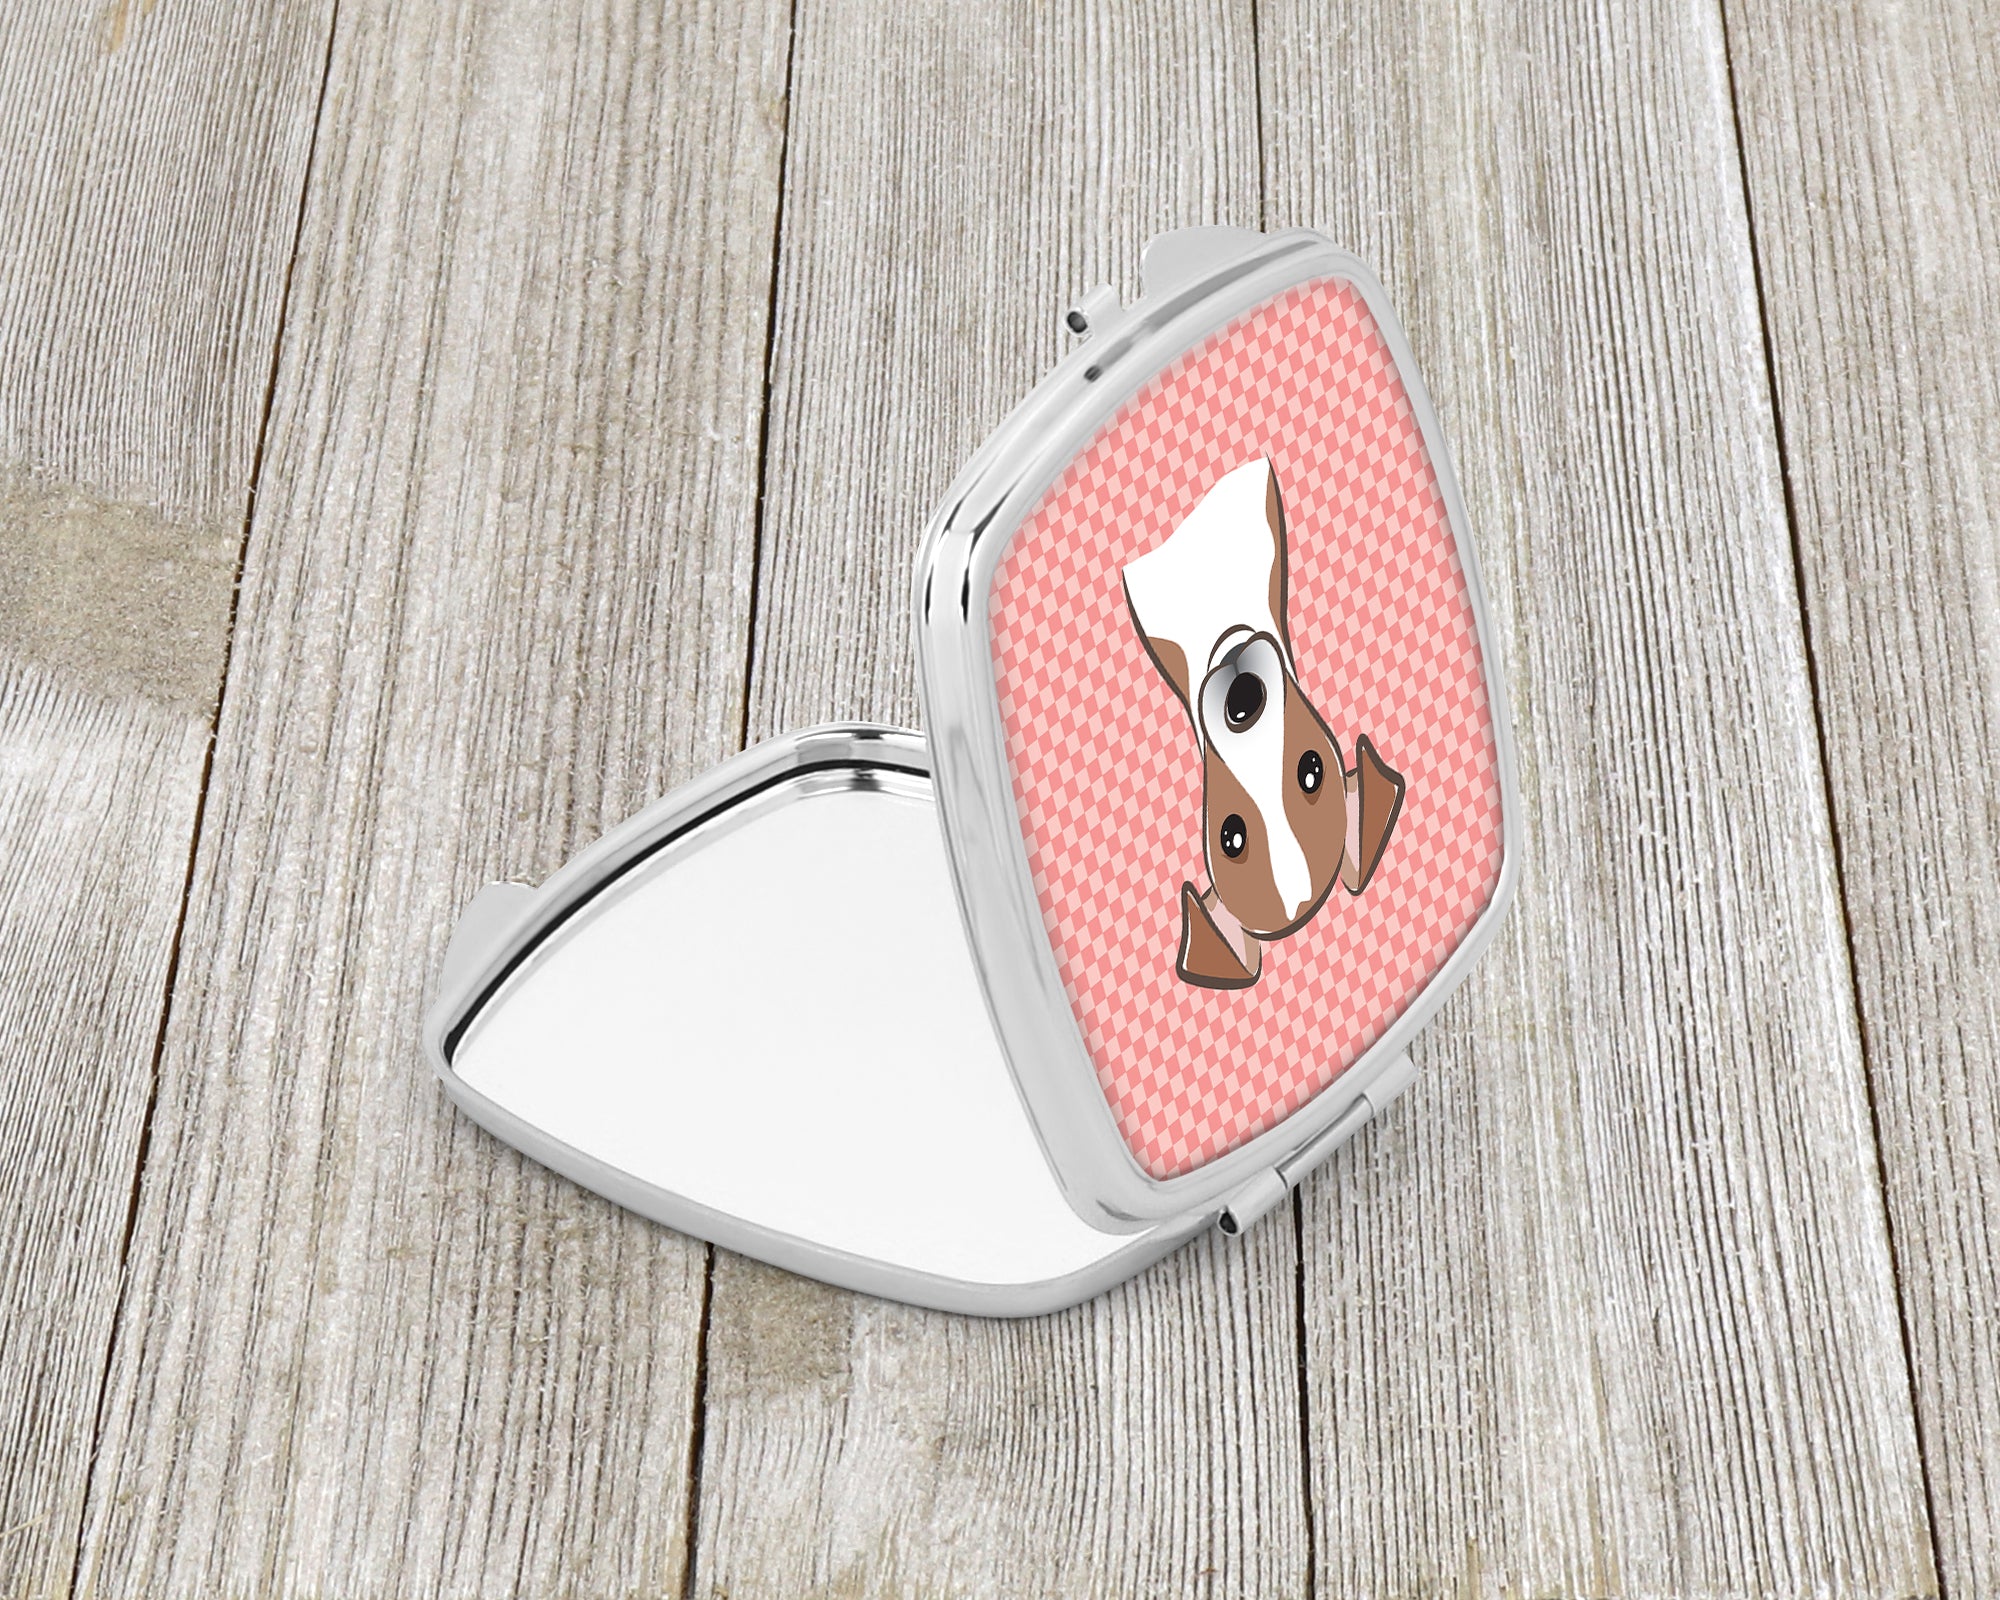 Checkerboard Pink Jack Russell Terrier Compact Mirror BB1260SCM  the-store.com.